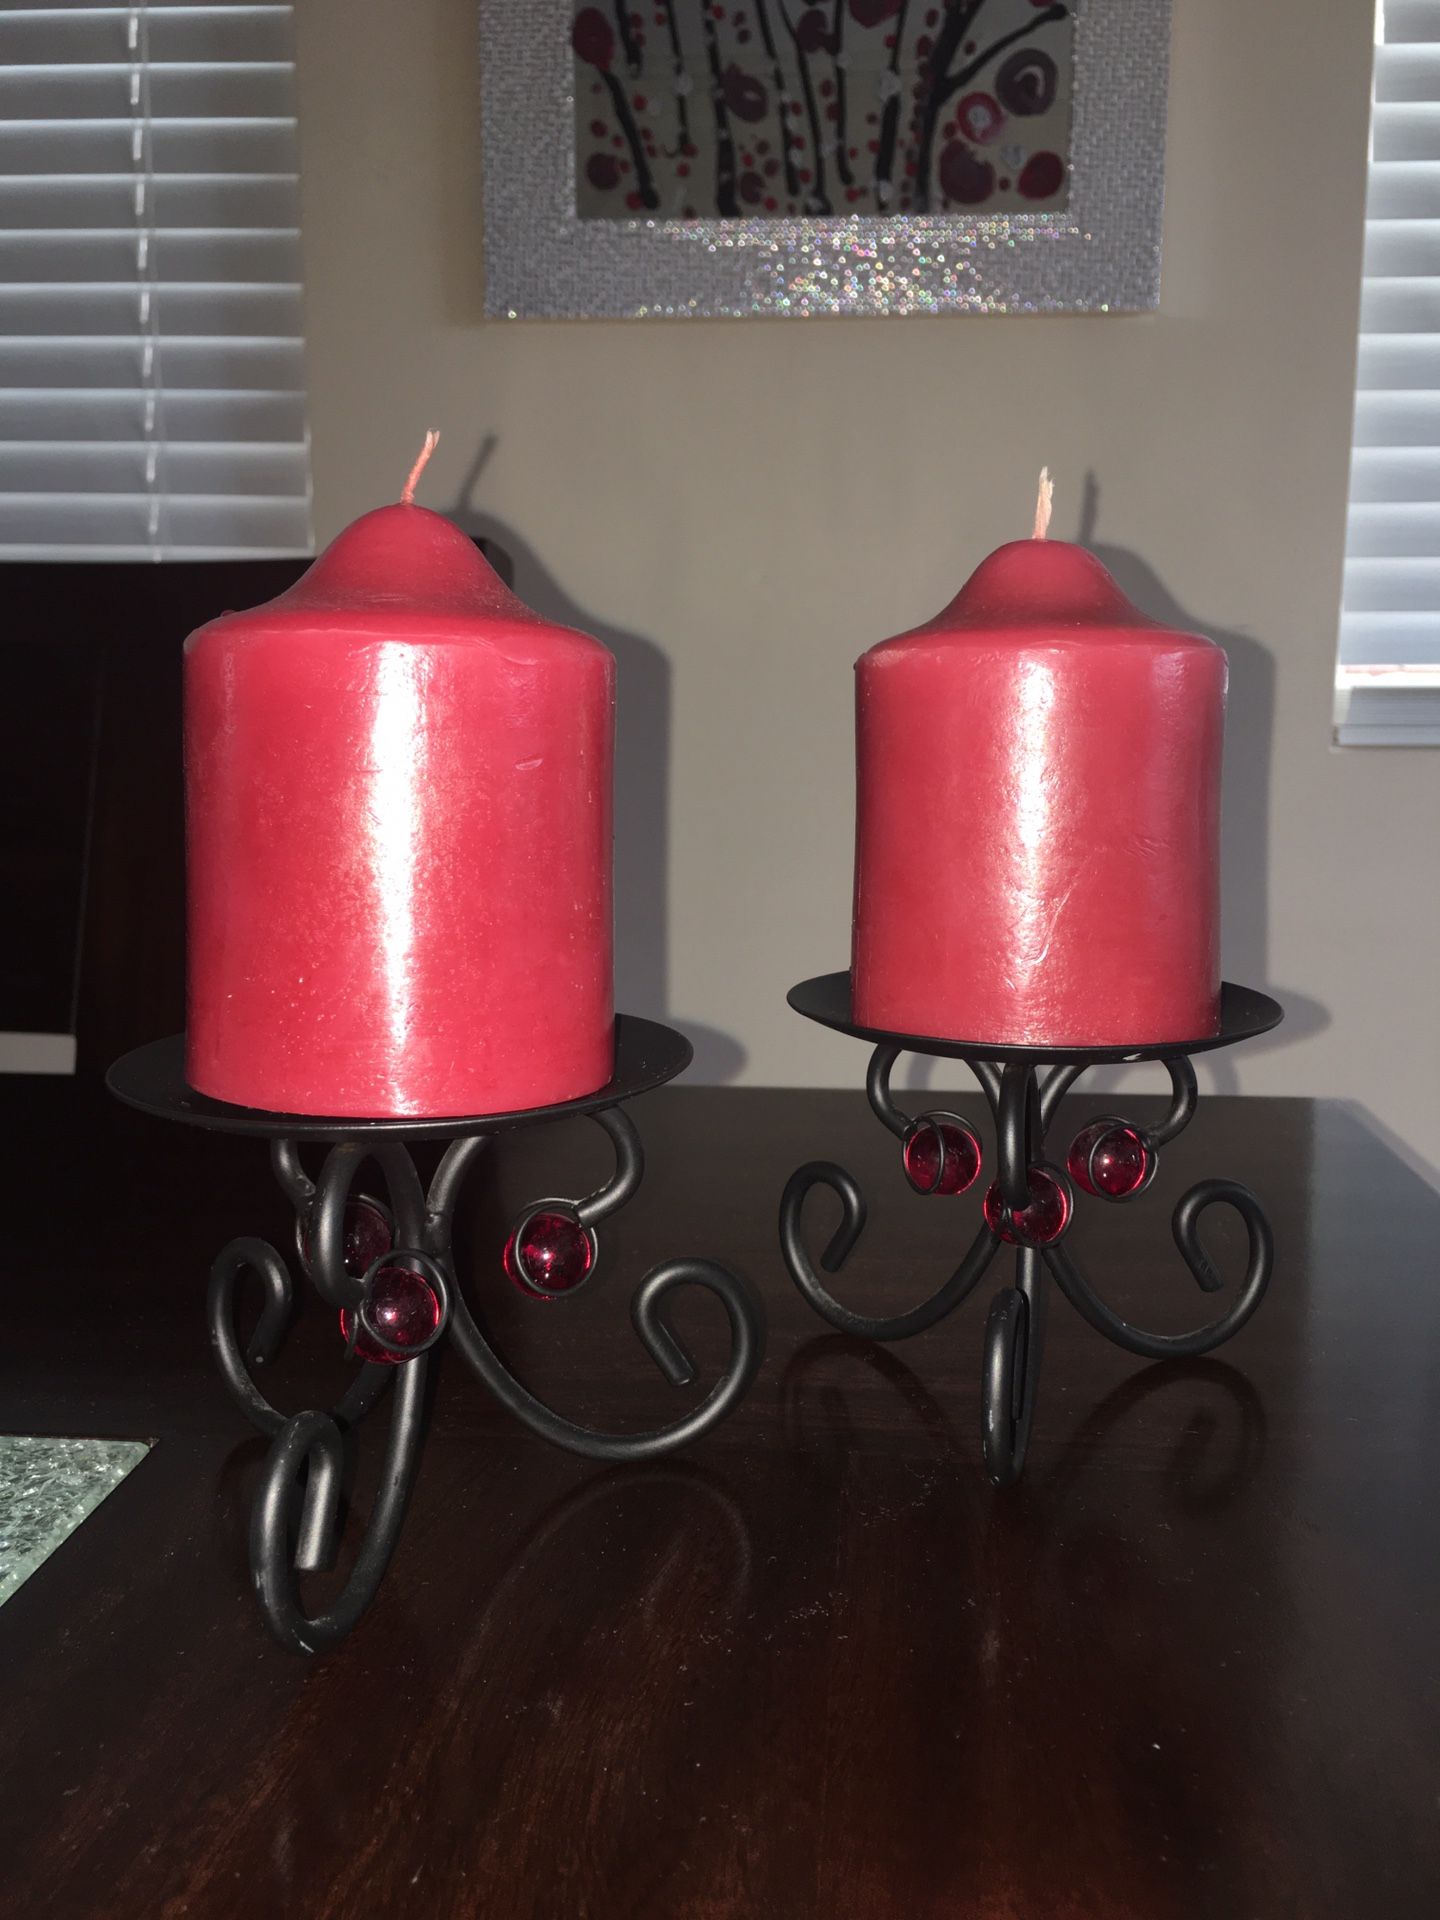 Set of 2 candle holders swirl design, with candles